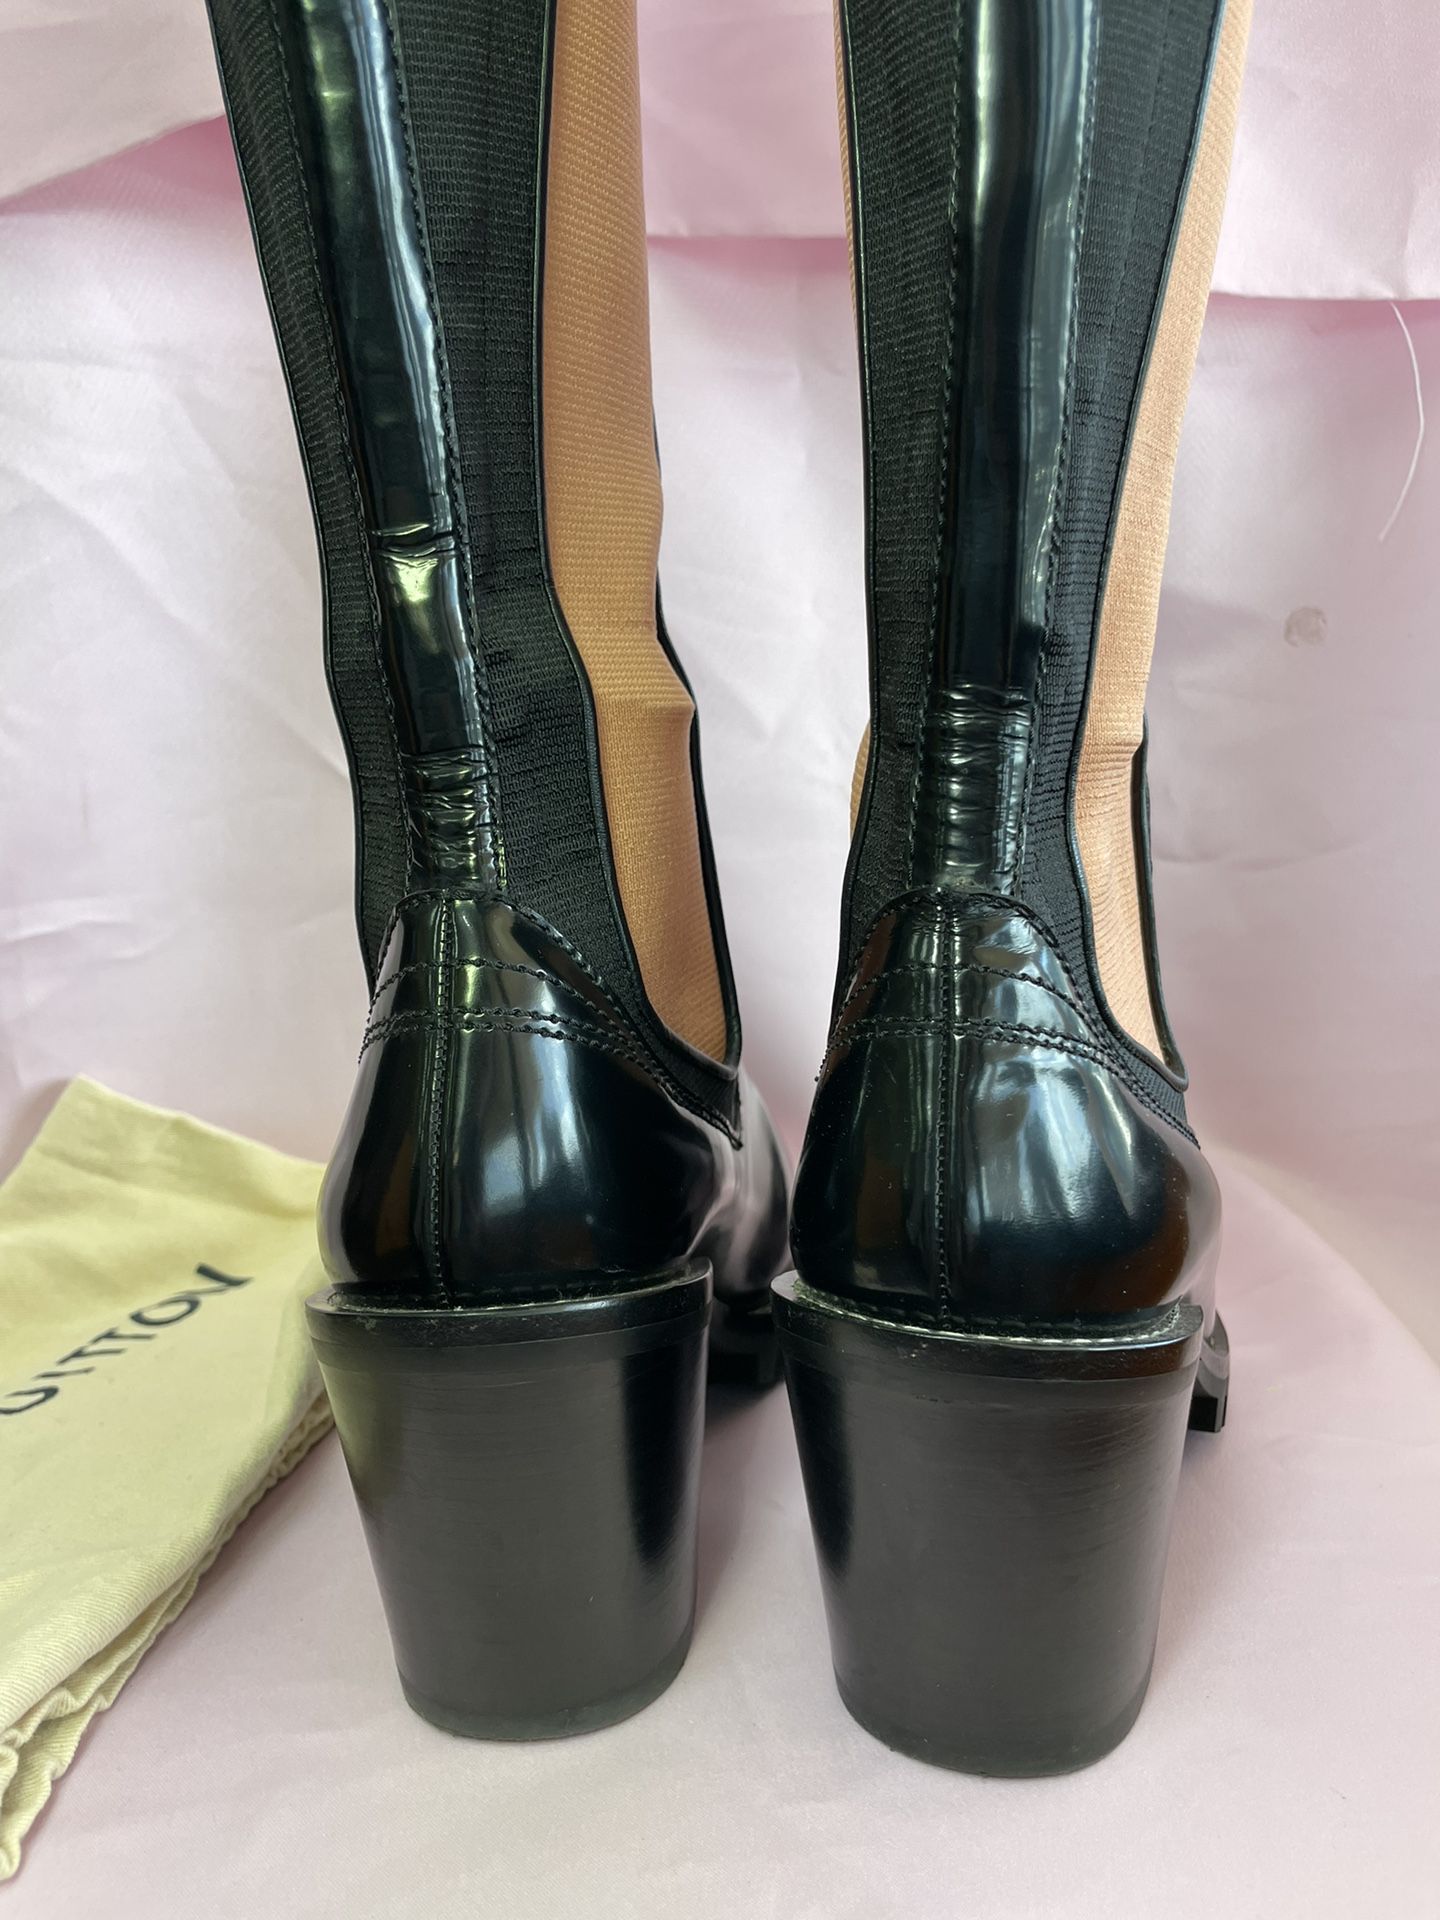 LV Limitless Shoes EU39 for Sale in Fort Lauderdale, FL - OfferUp